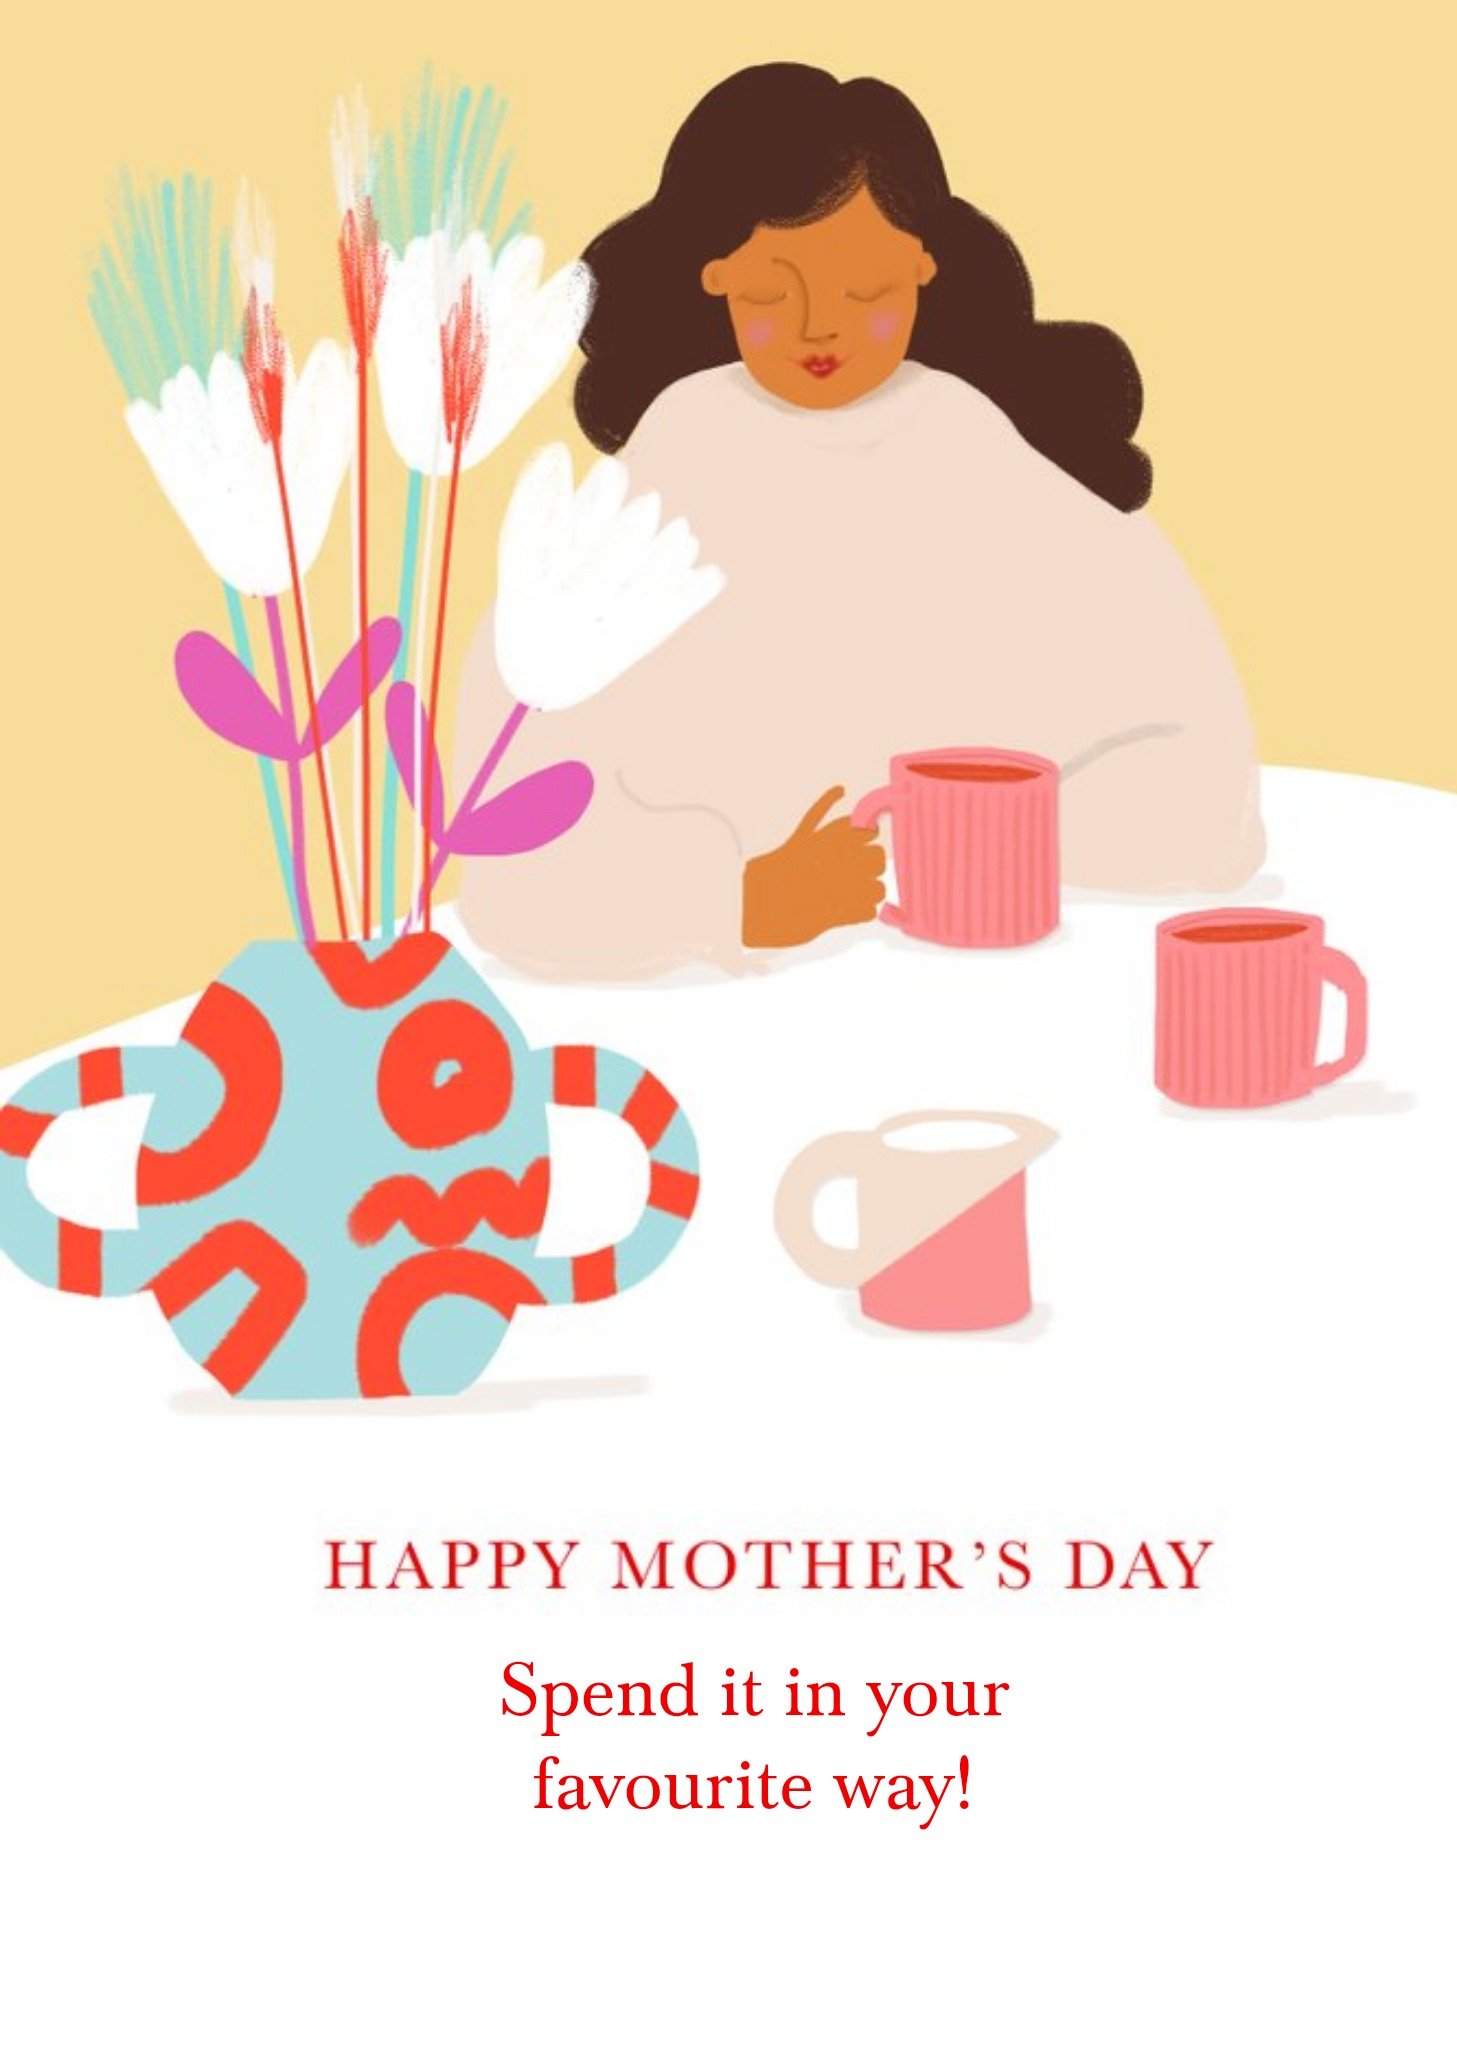 Moonpig Illustration Of A Woman Relaxing Happy Mother's Day Card Ecard